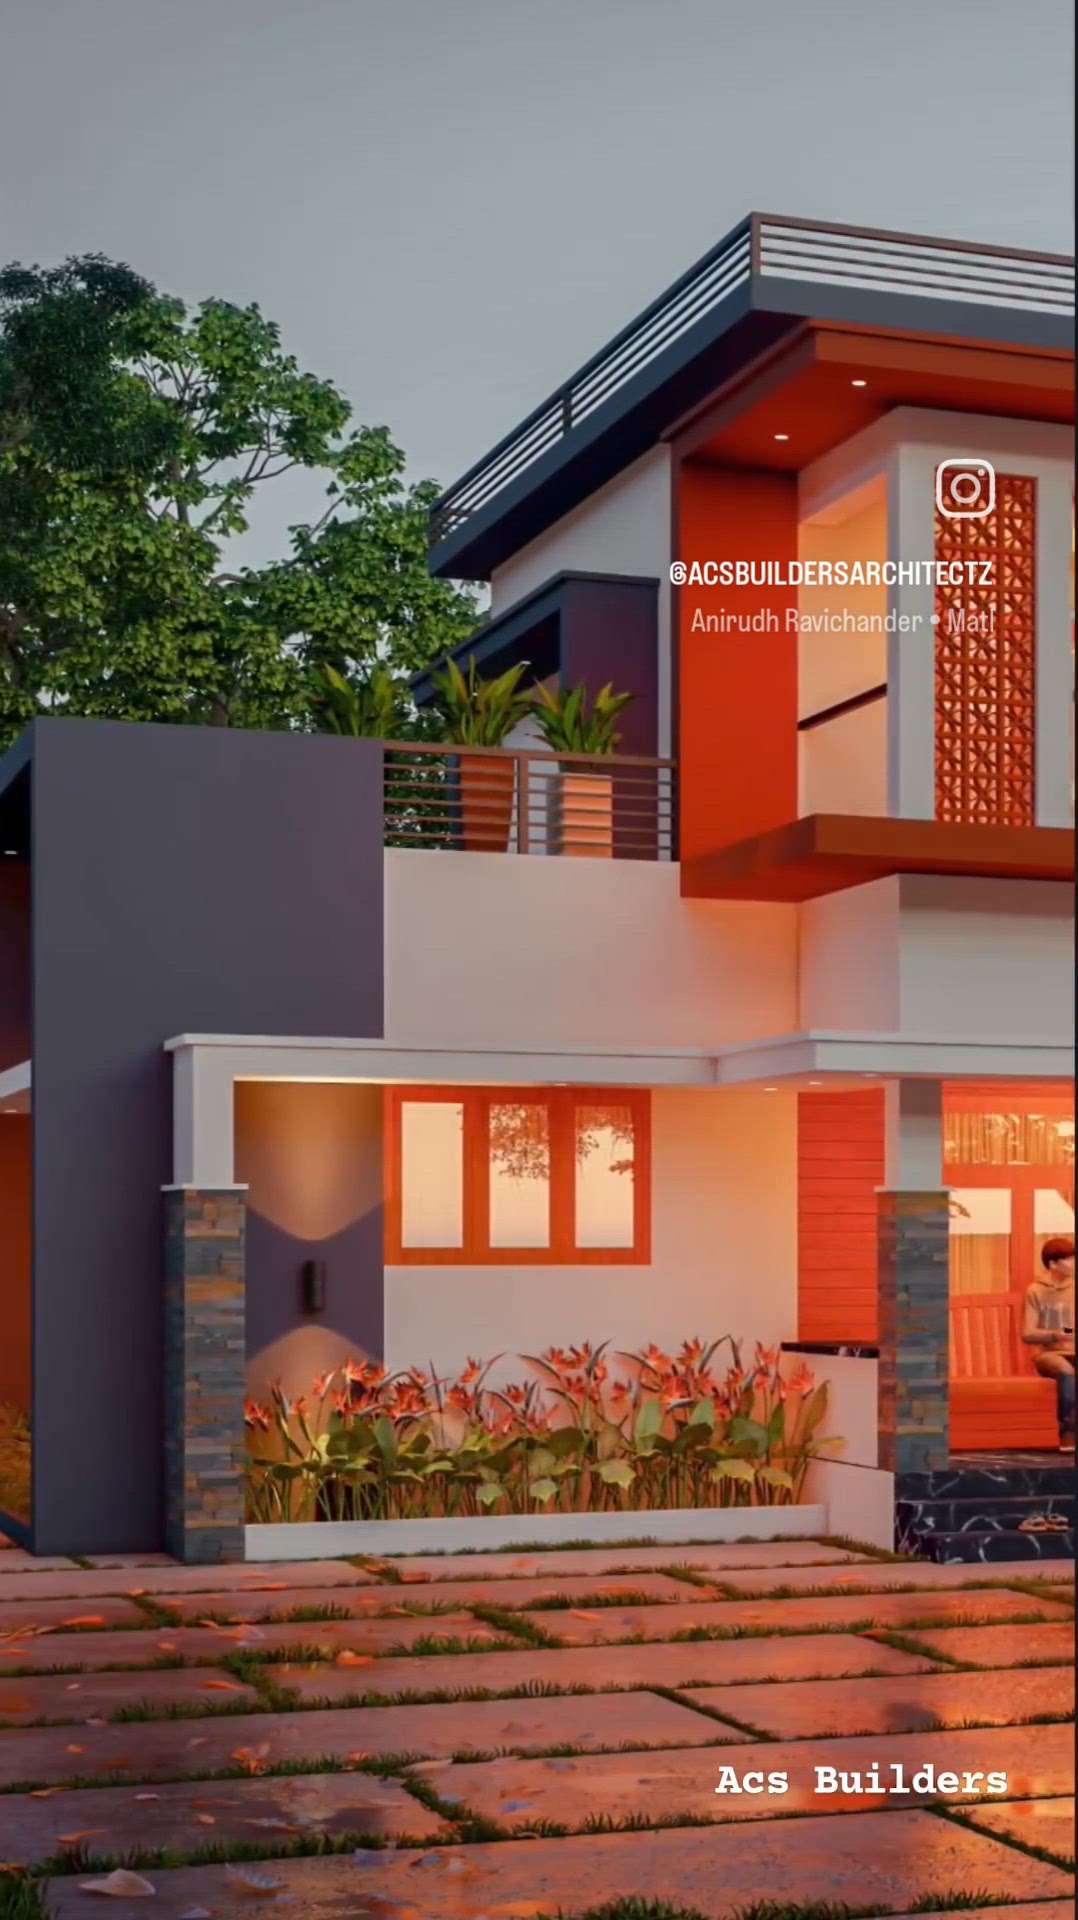 RESIDENCE FOR MR PRAJEESH AND FAM🥰

AREA 1800 SQFT
4BHK 


#ContemporaryHouse